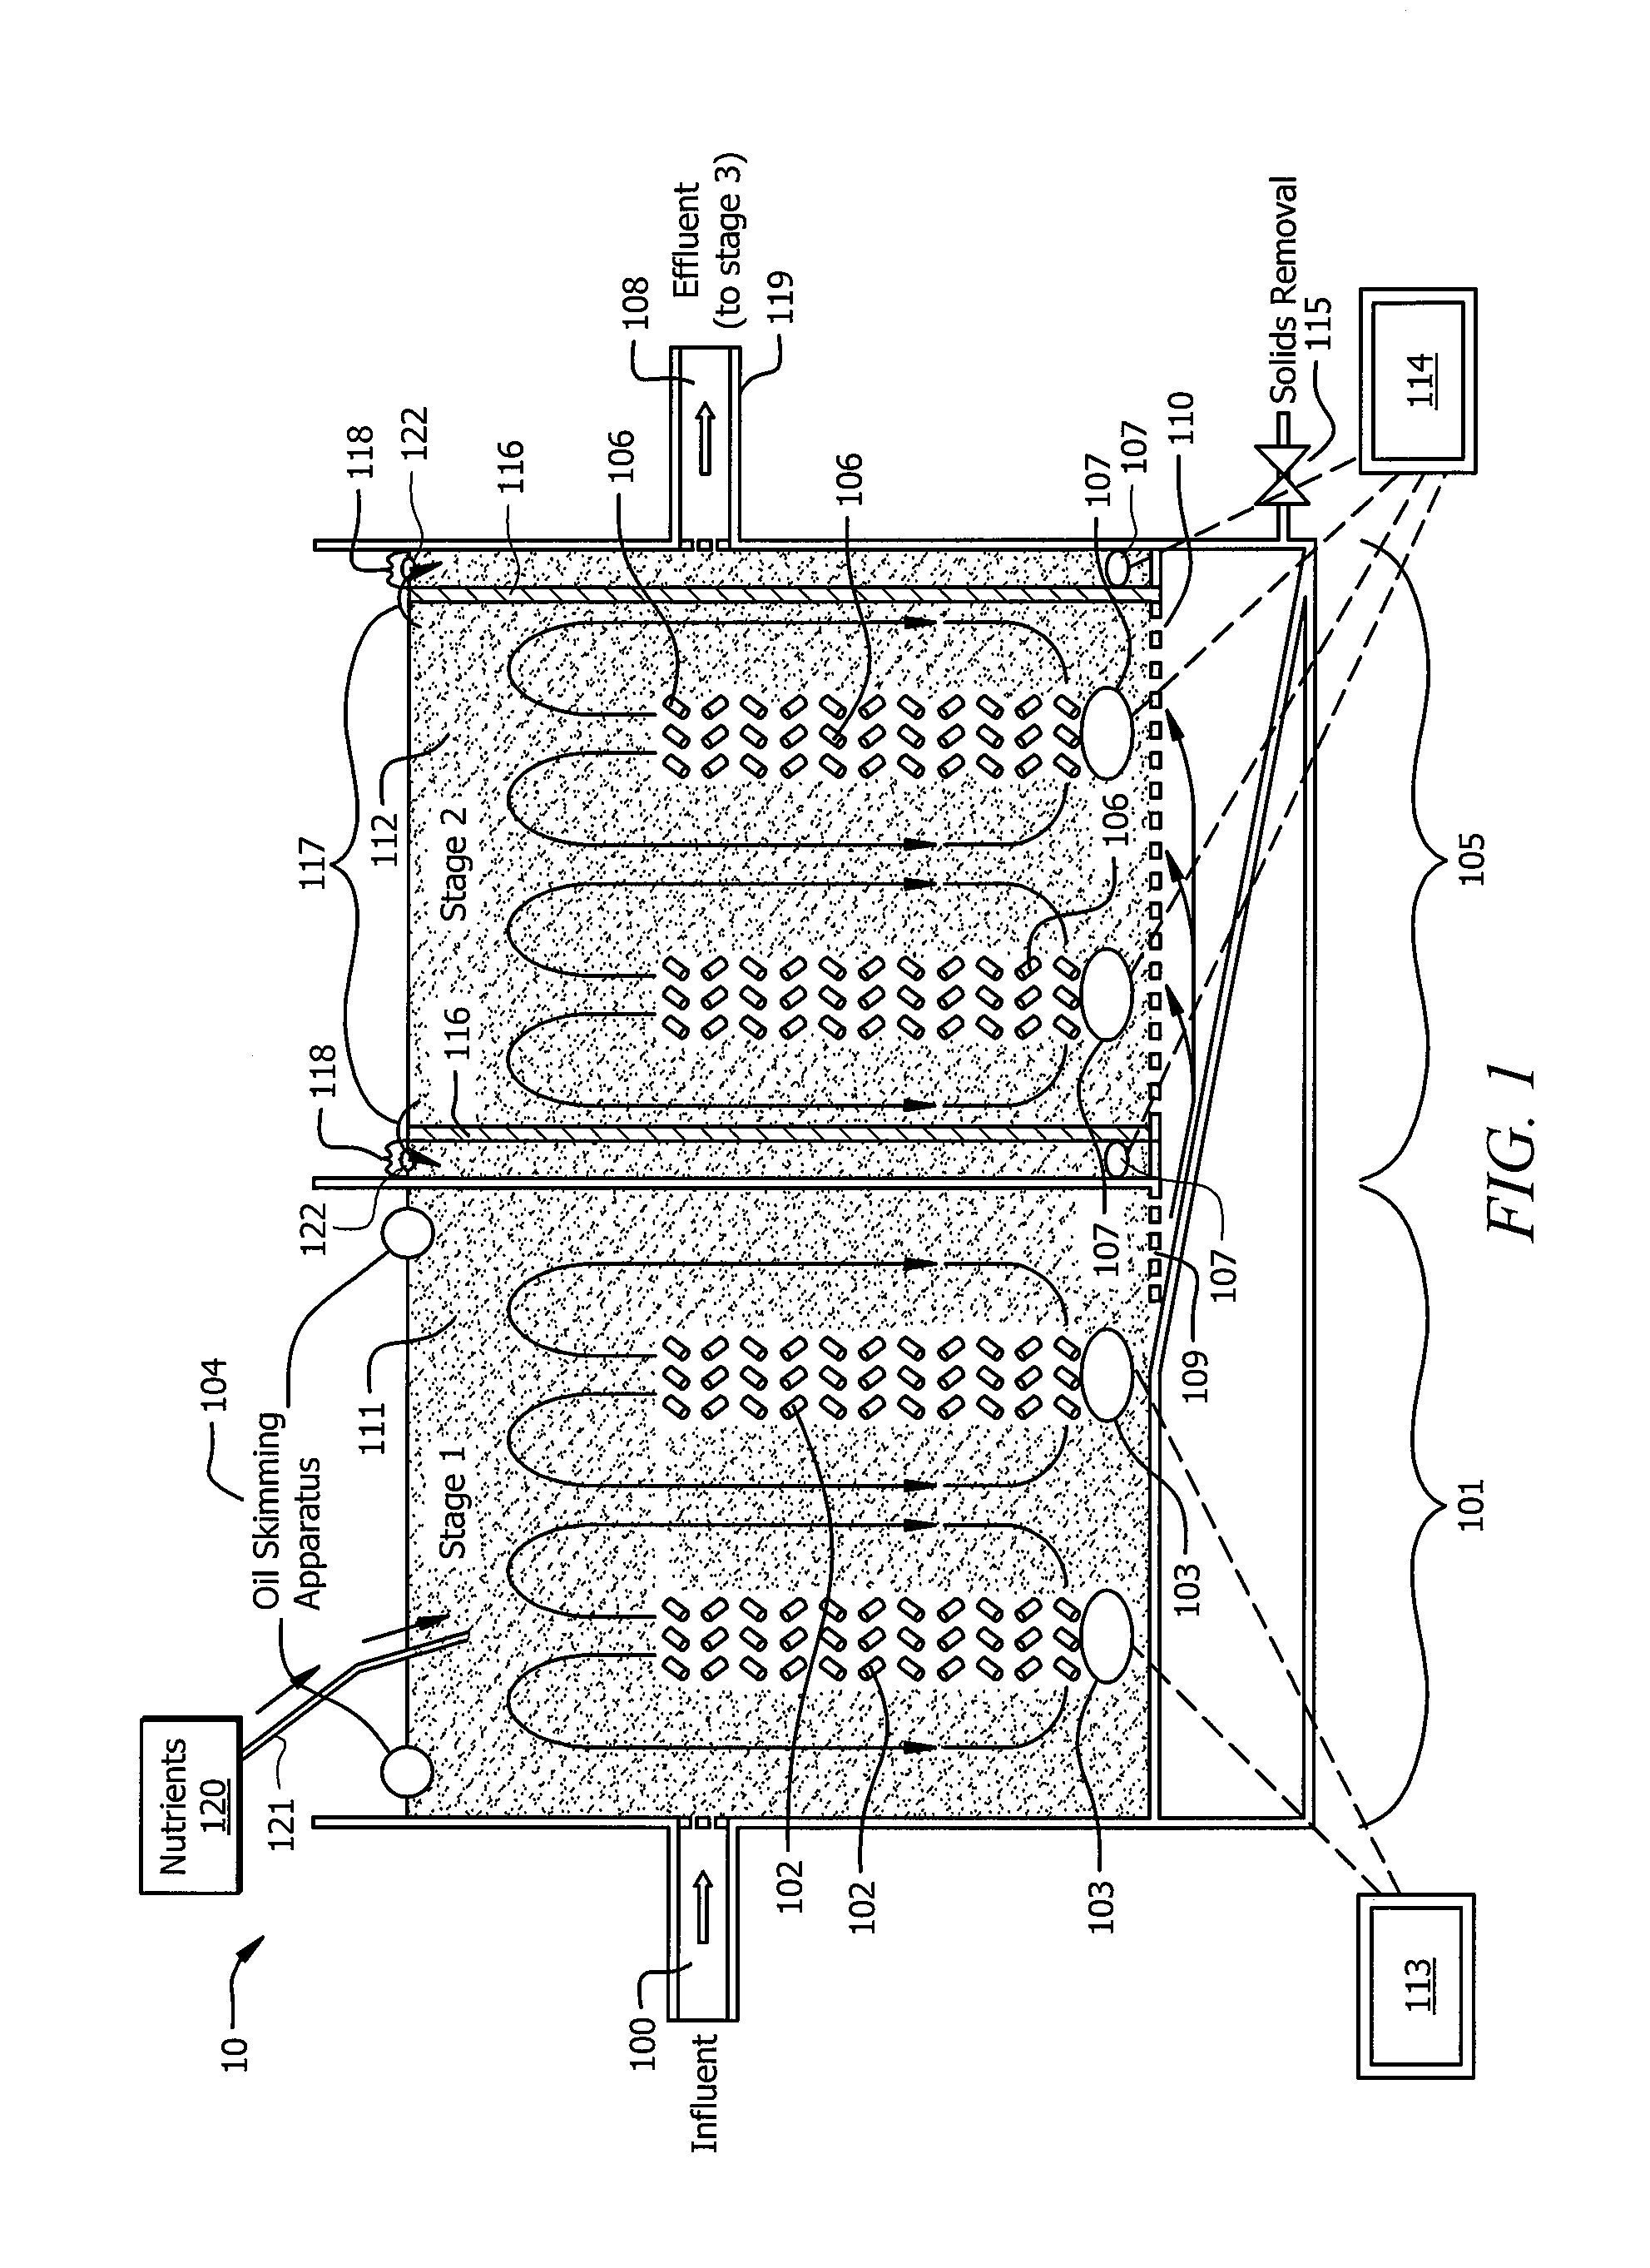 Water treatment systems and methods for concurrent removal of various types of organic materials